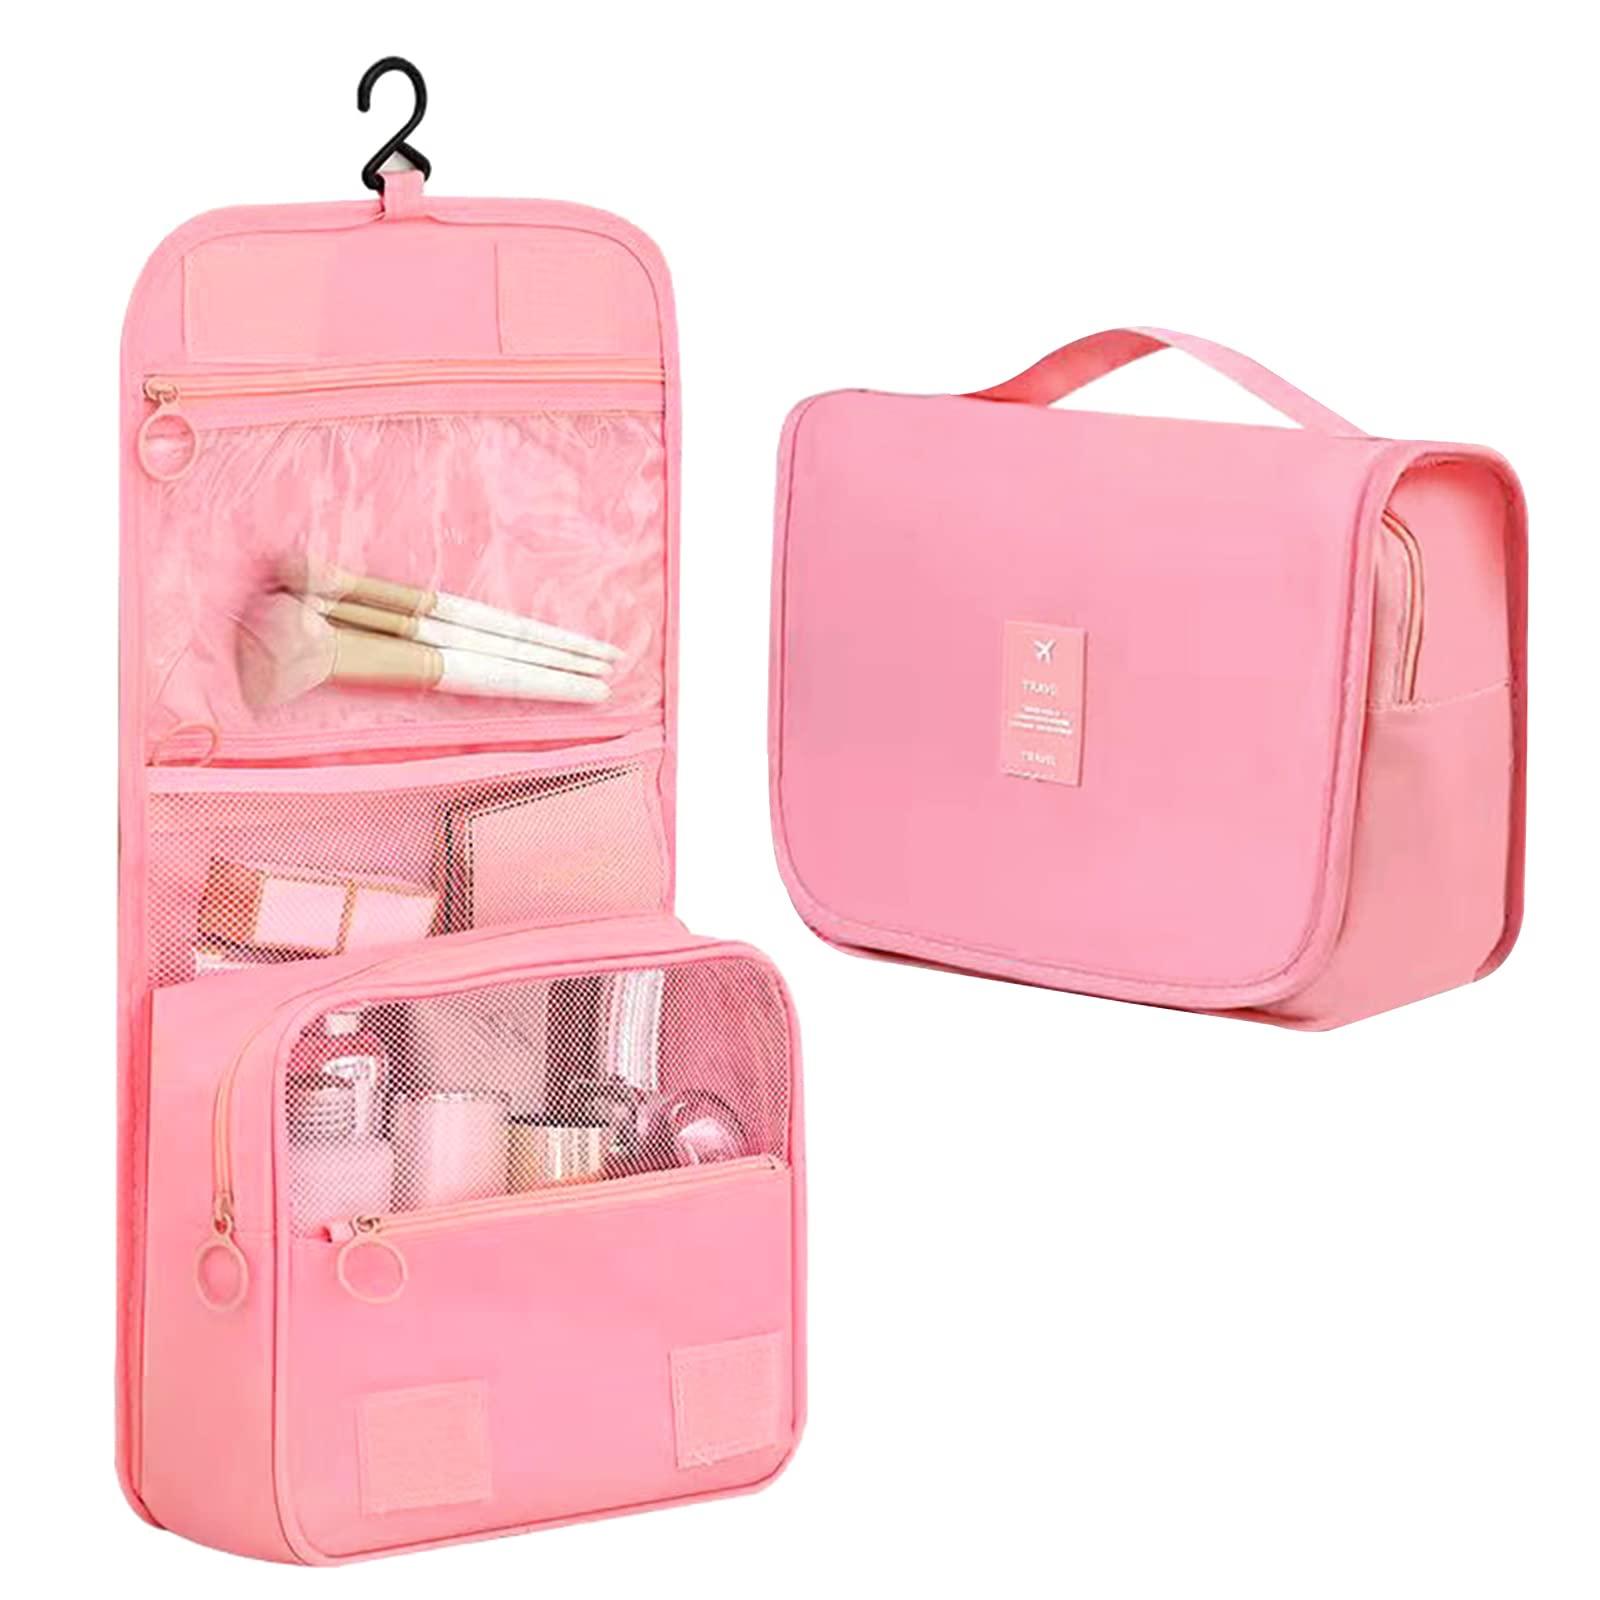 Hanging Toiletry Bag, Travel Wash Bag for Women Portable Folding Cosmetic Organizer Large Capacity Girls Makeup Bag Waterproof Shower Bag with Separate Compartment, Pink